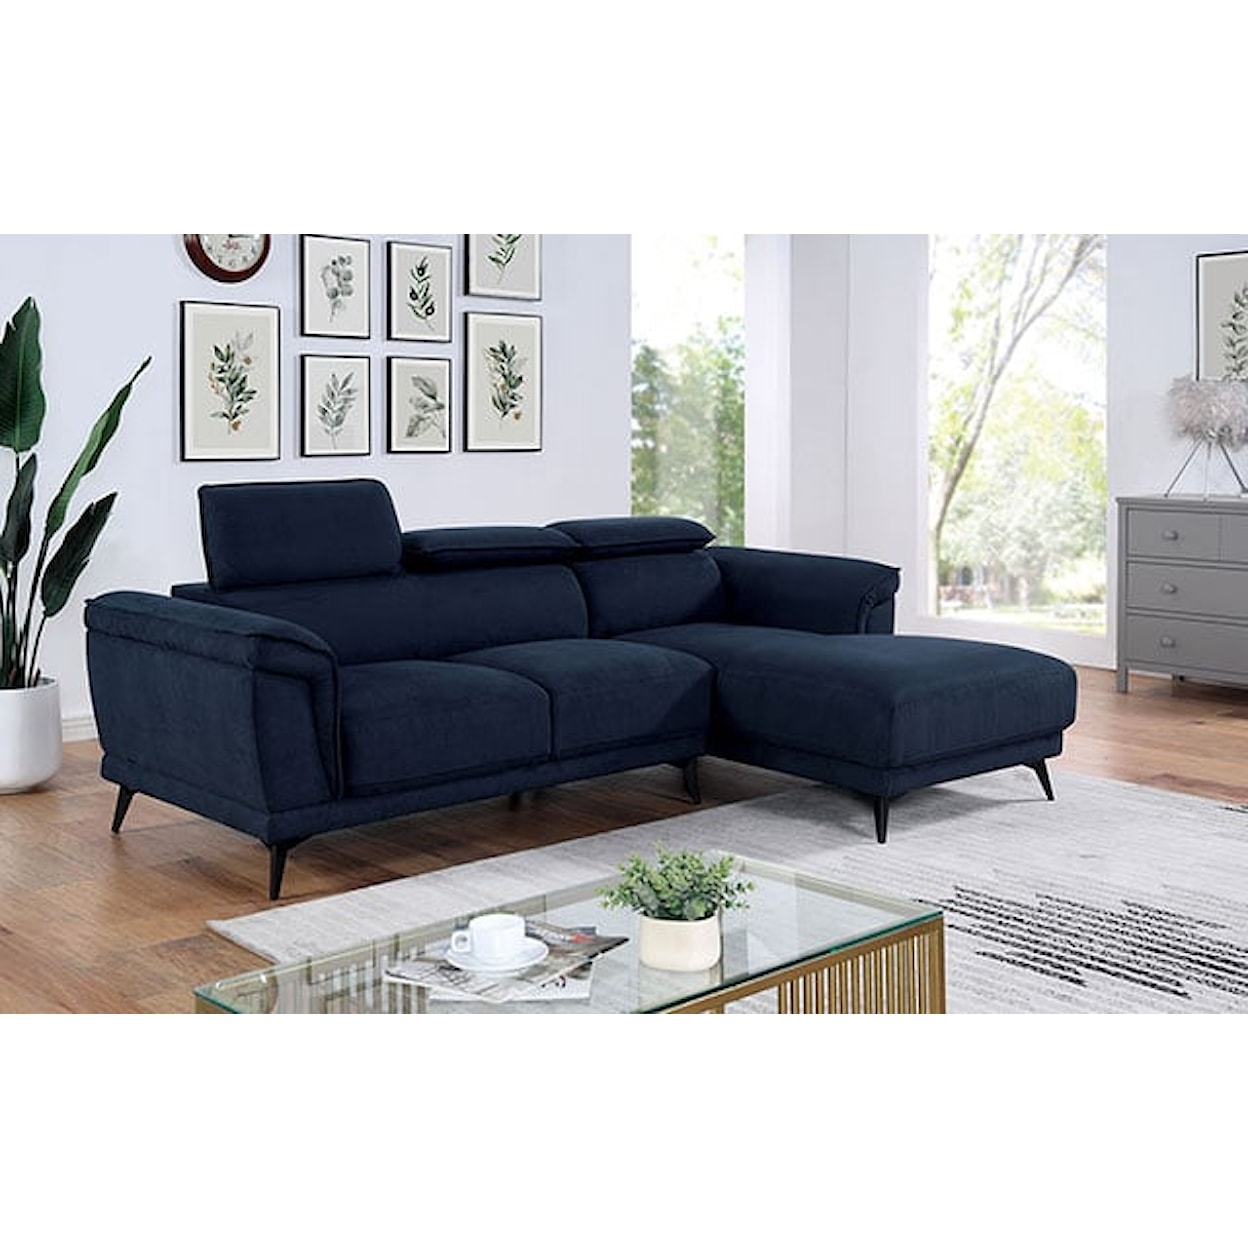 Furniture of America Napanee Sectional with Adjustable Headrests